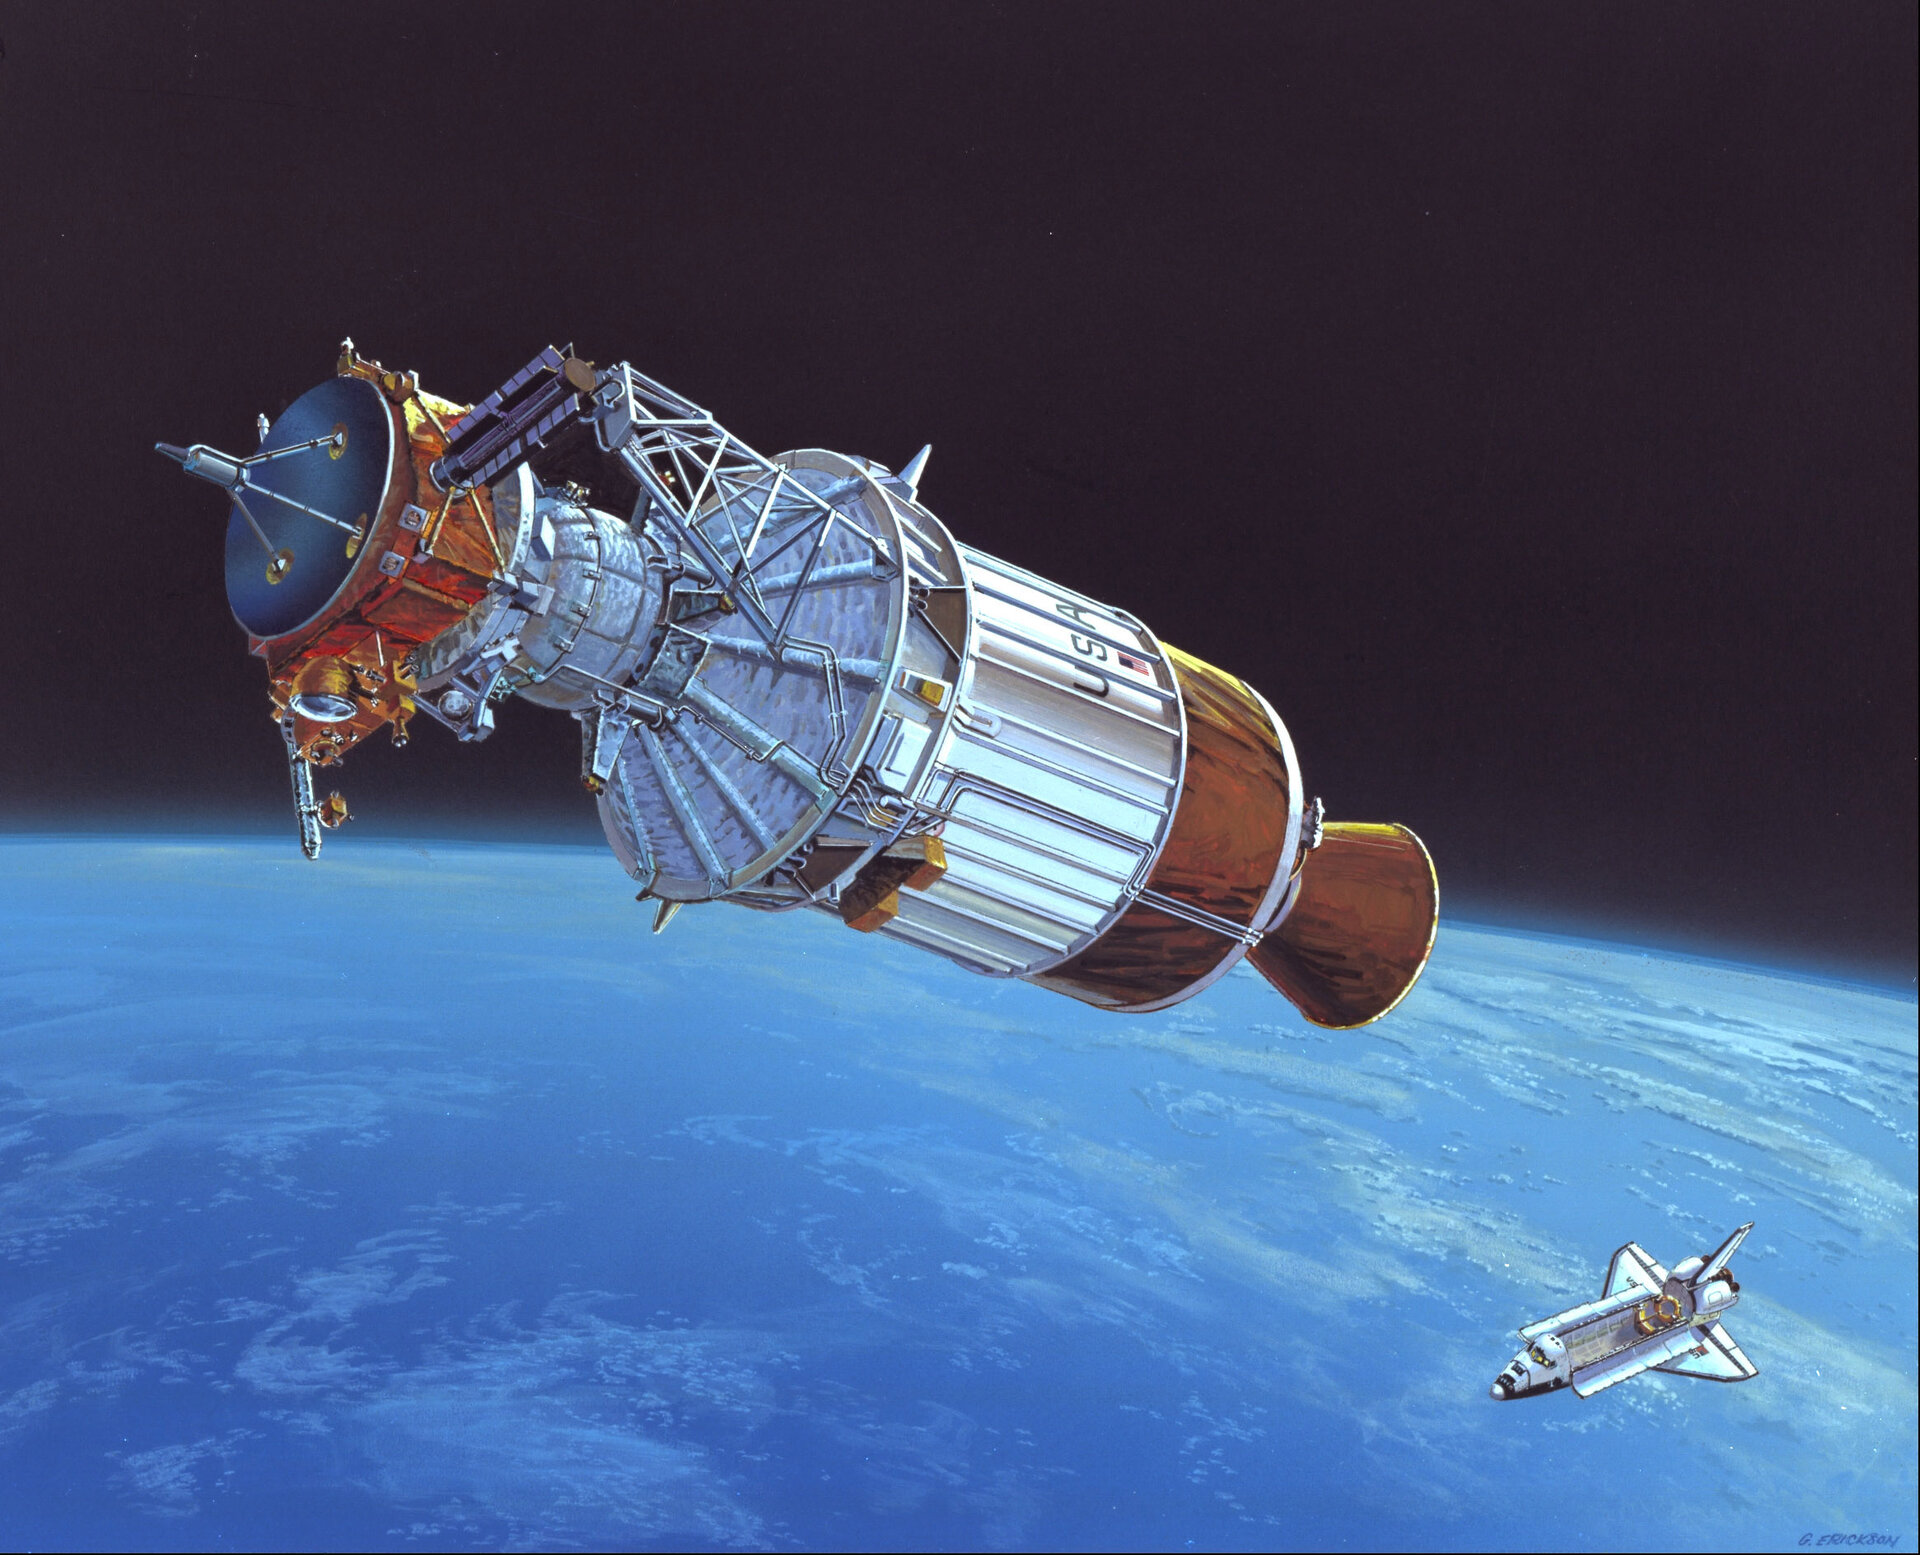 Ulysses upon deployment from Space Shuttle Discovery